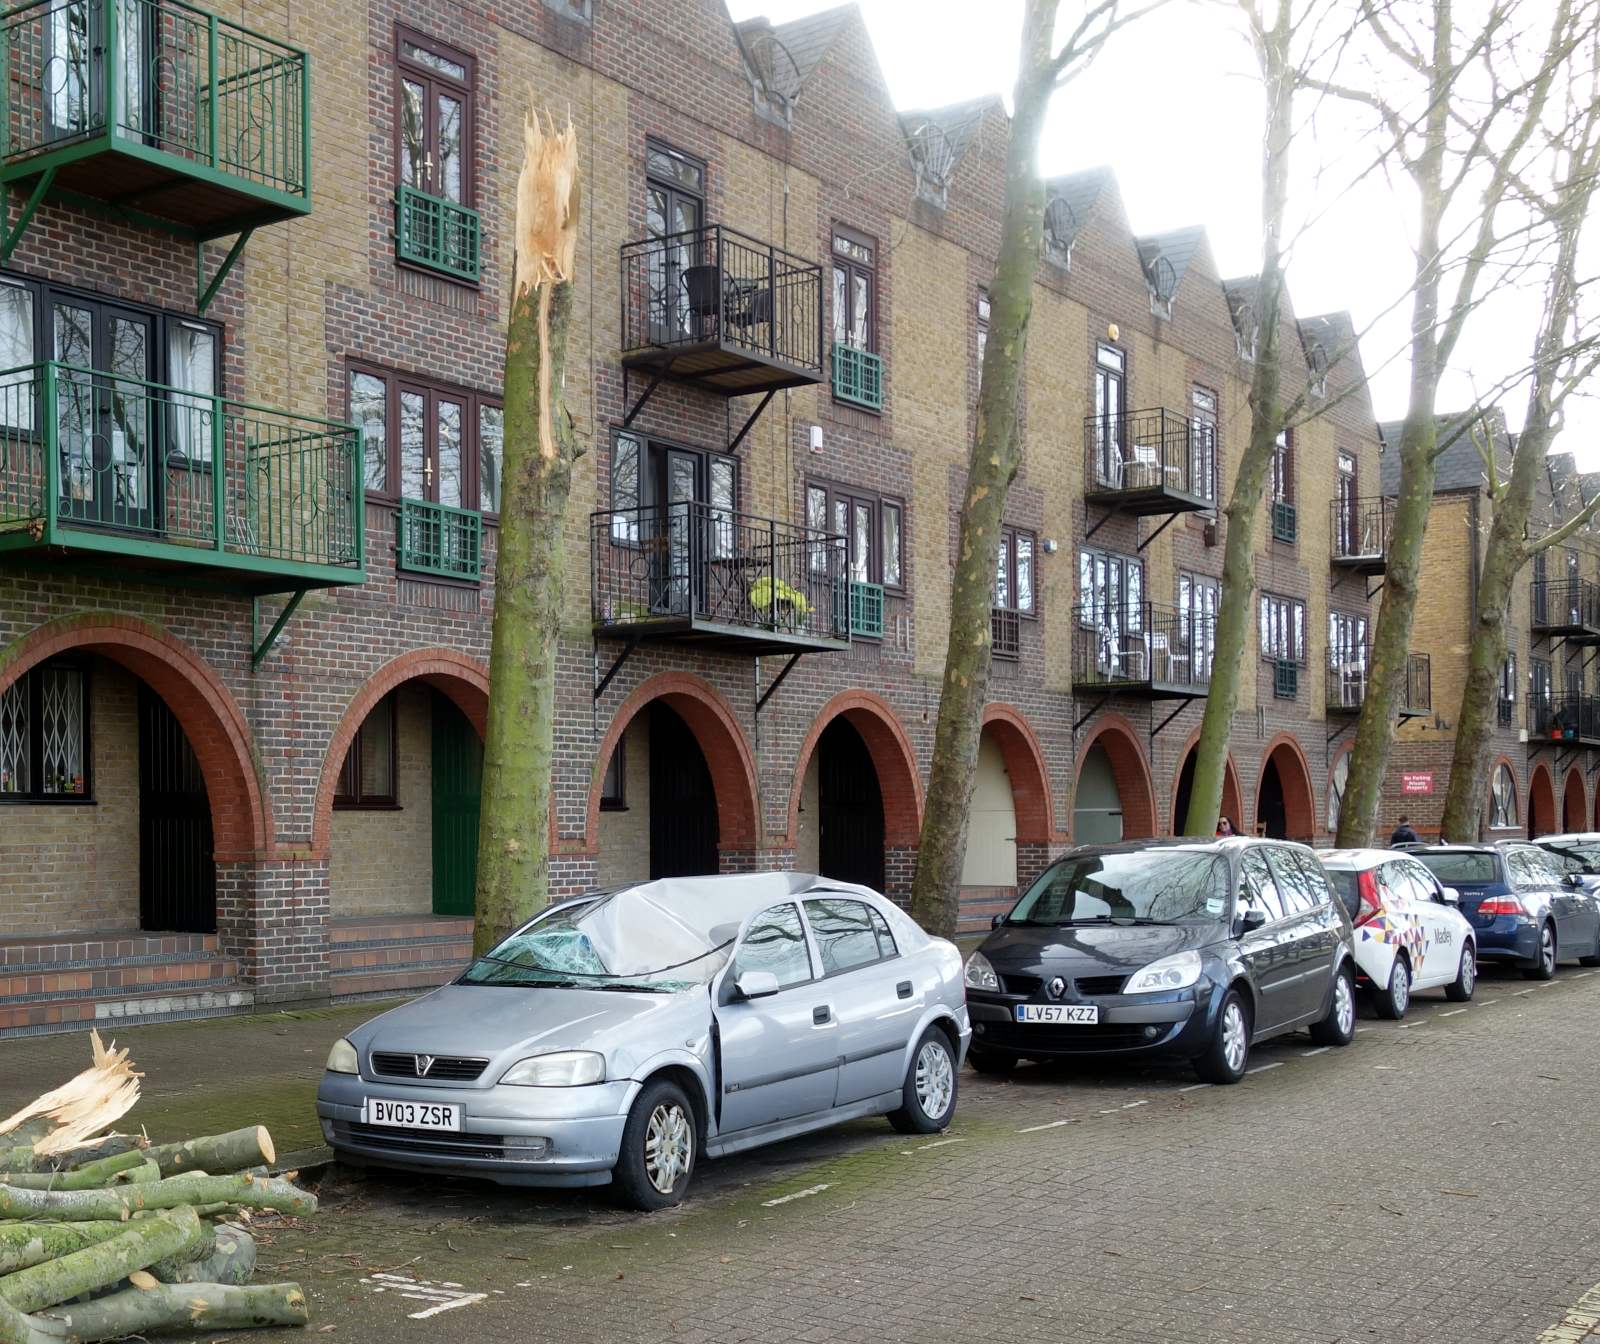 A car is parked on the side of the road next to a tall tree and a row of
buildings. The tree is snapped off at about third floor height, and the
roof of the car is crushed down to below the bonnet height.